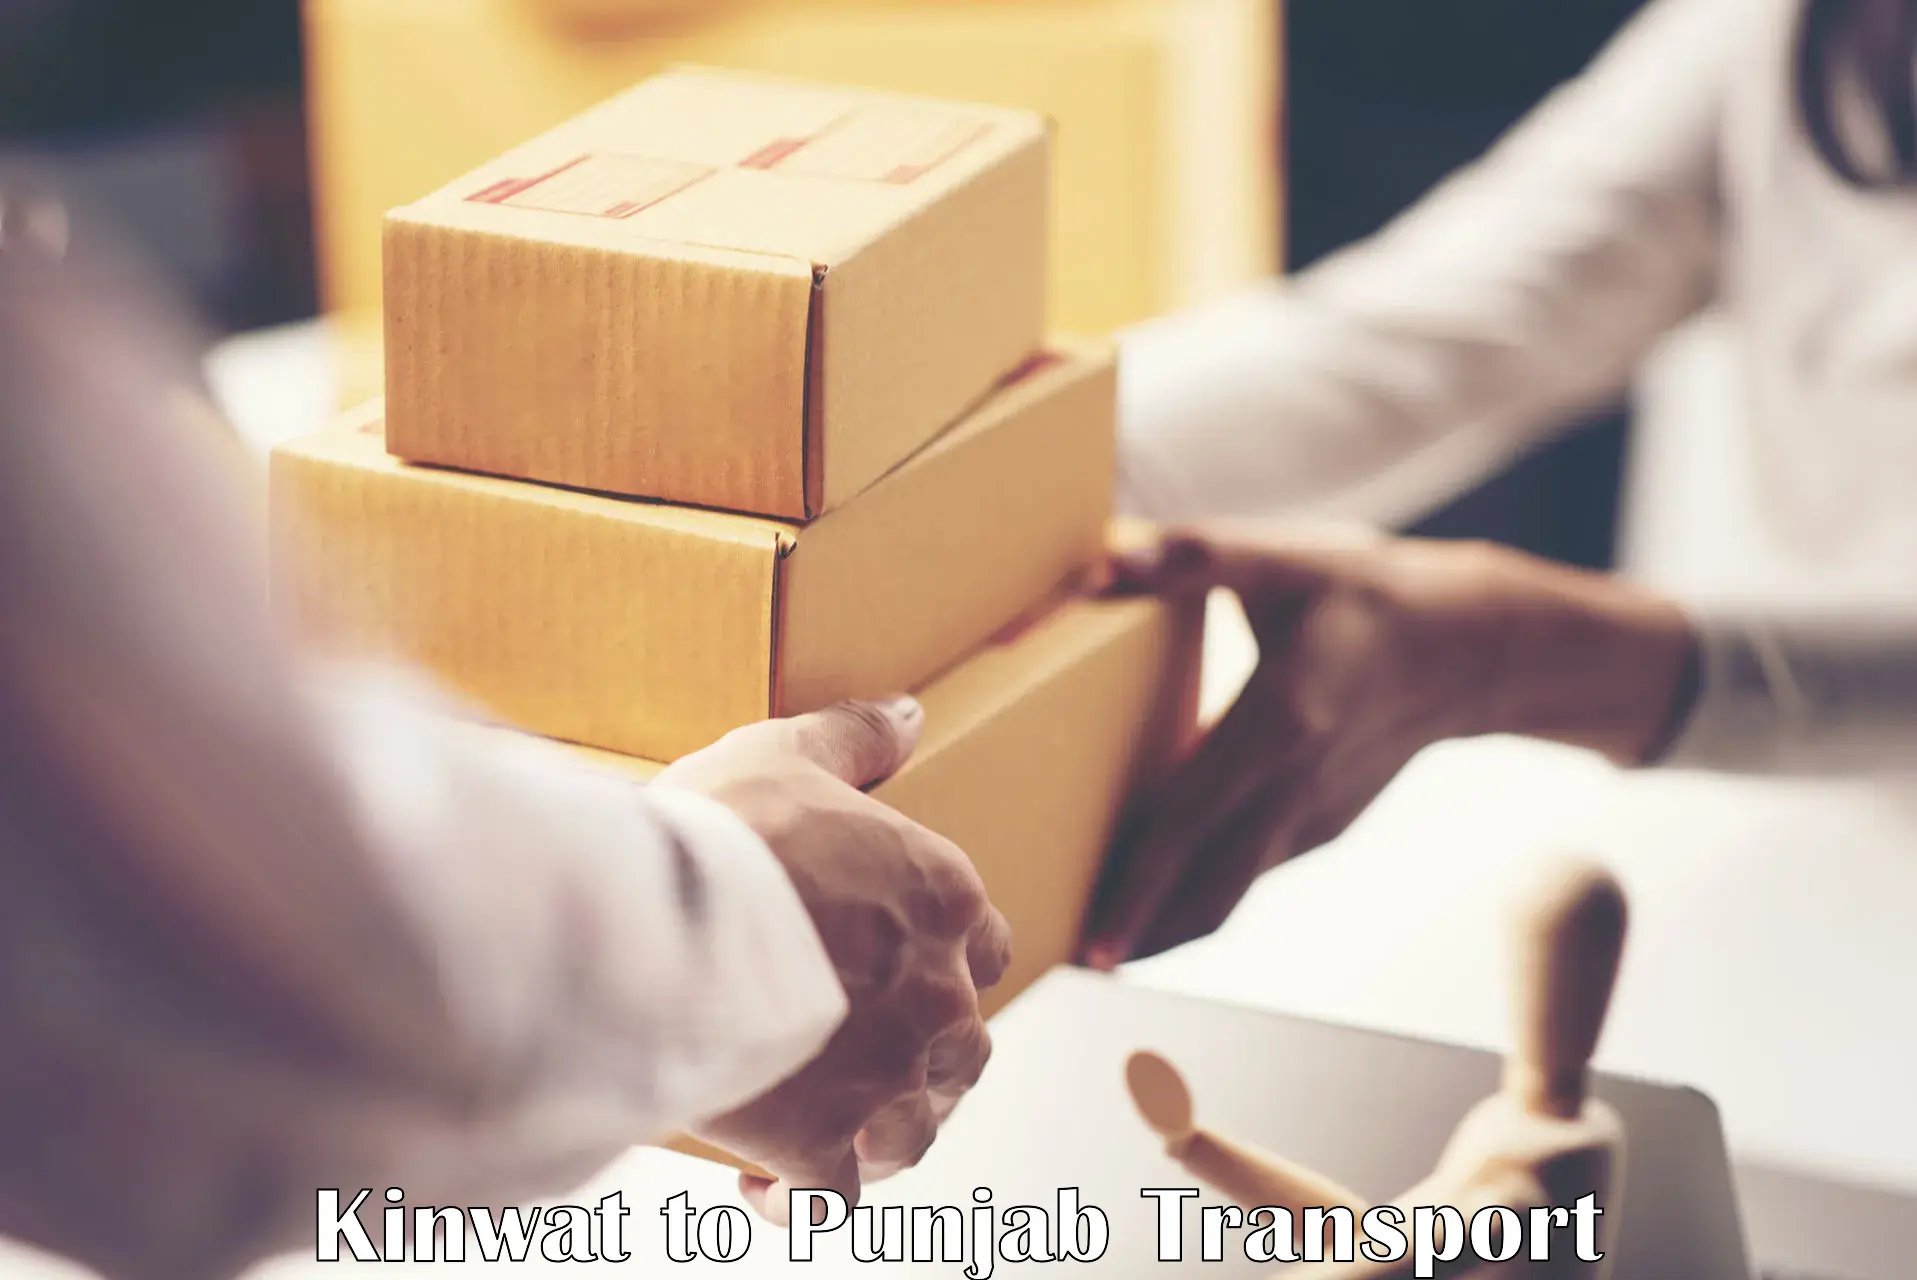 All India transport service Kinwat to Sultanpur Lodhi